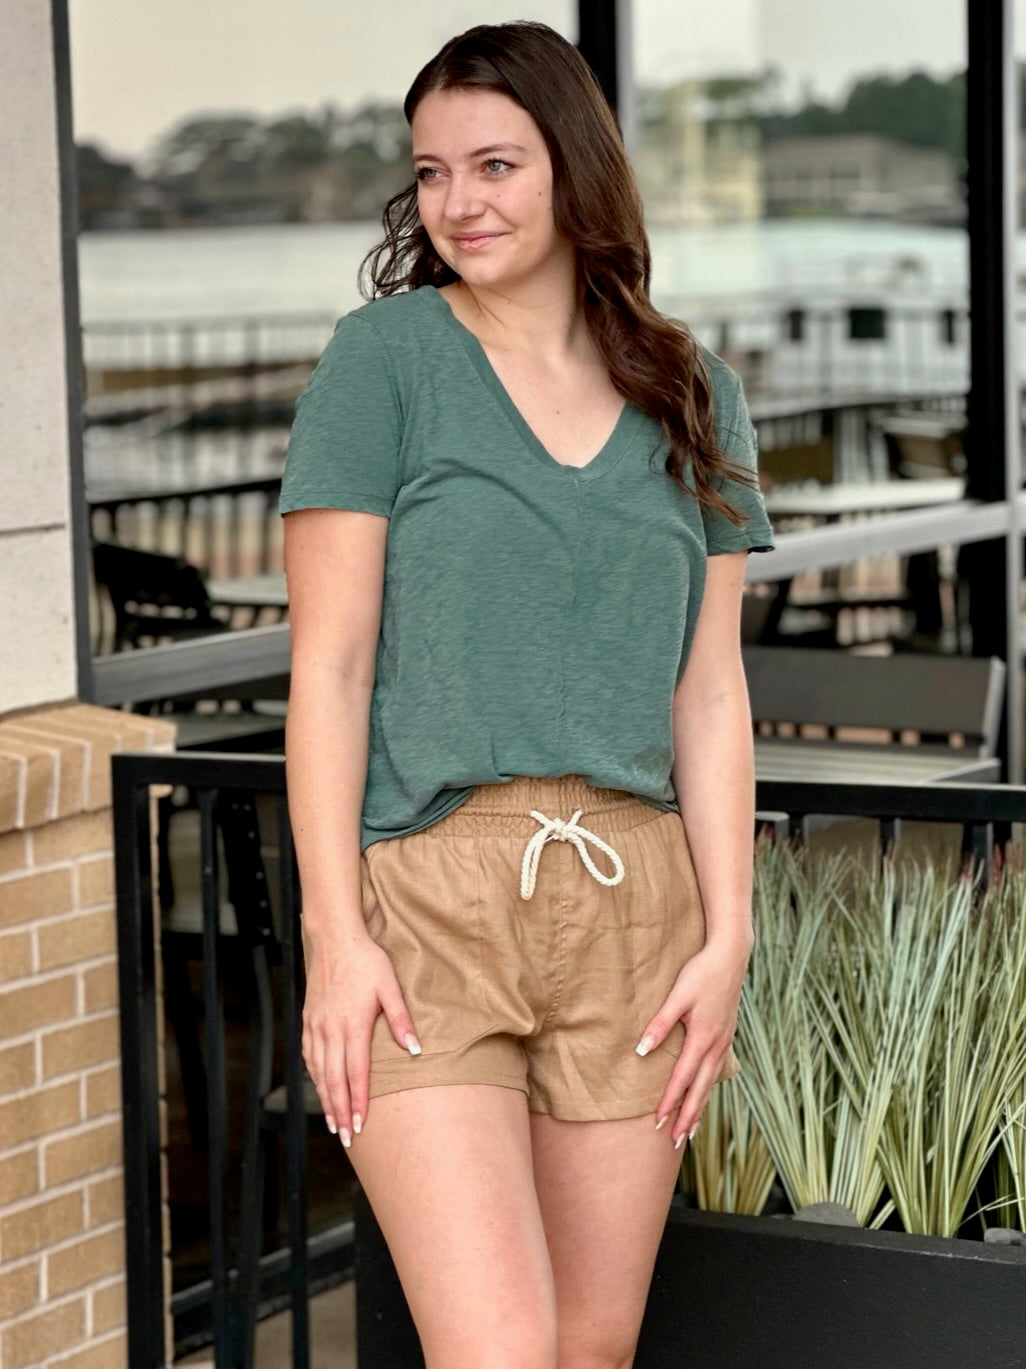 MEGAN SMILING TO THE LEFT IN SHORTS